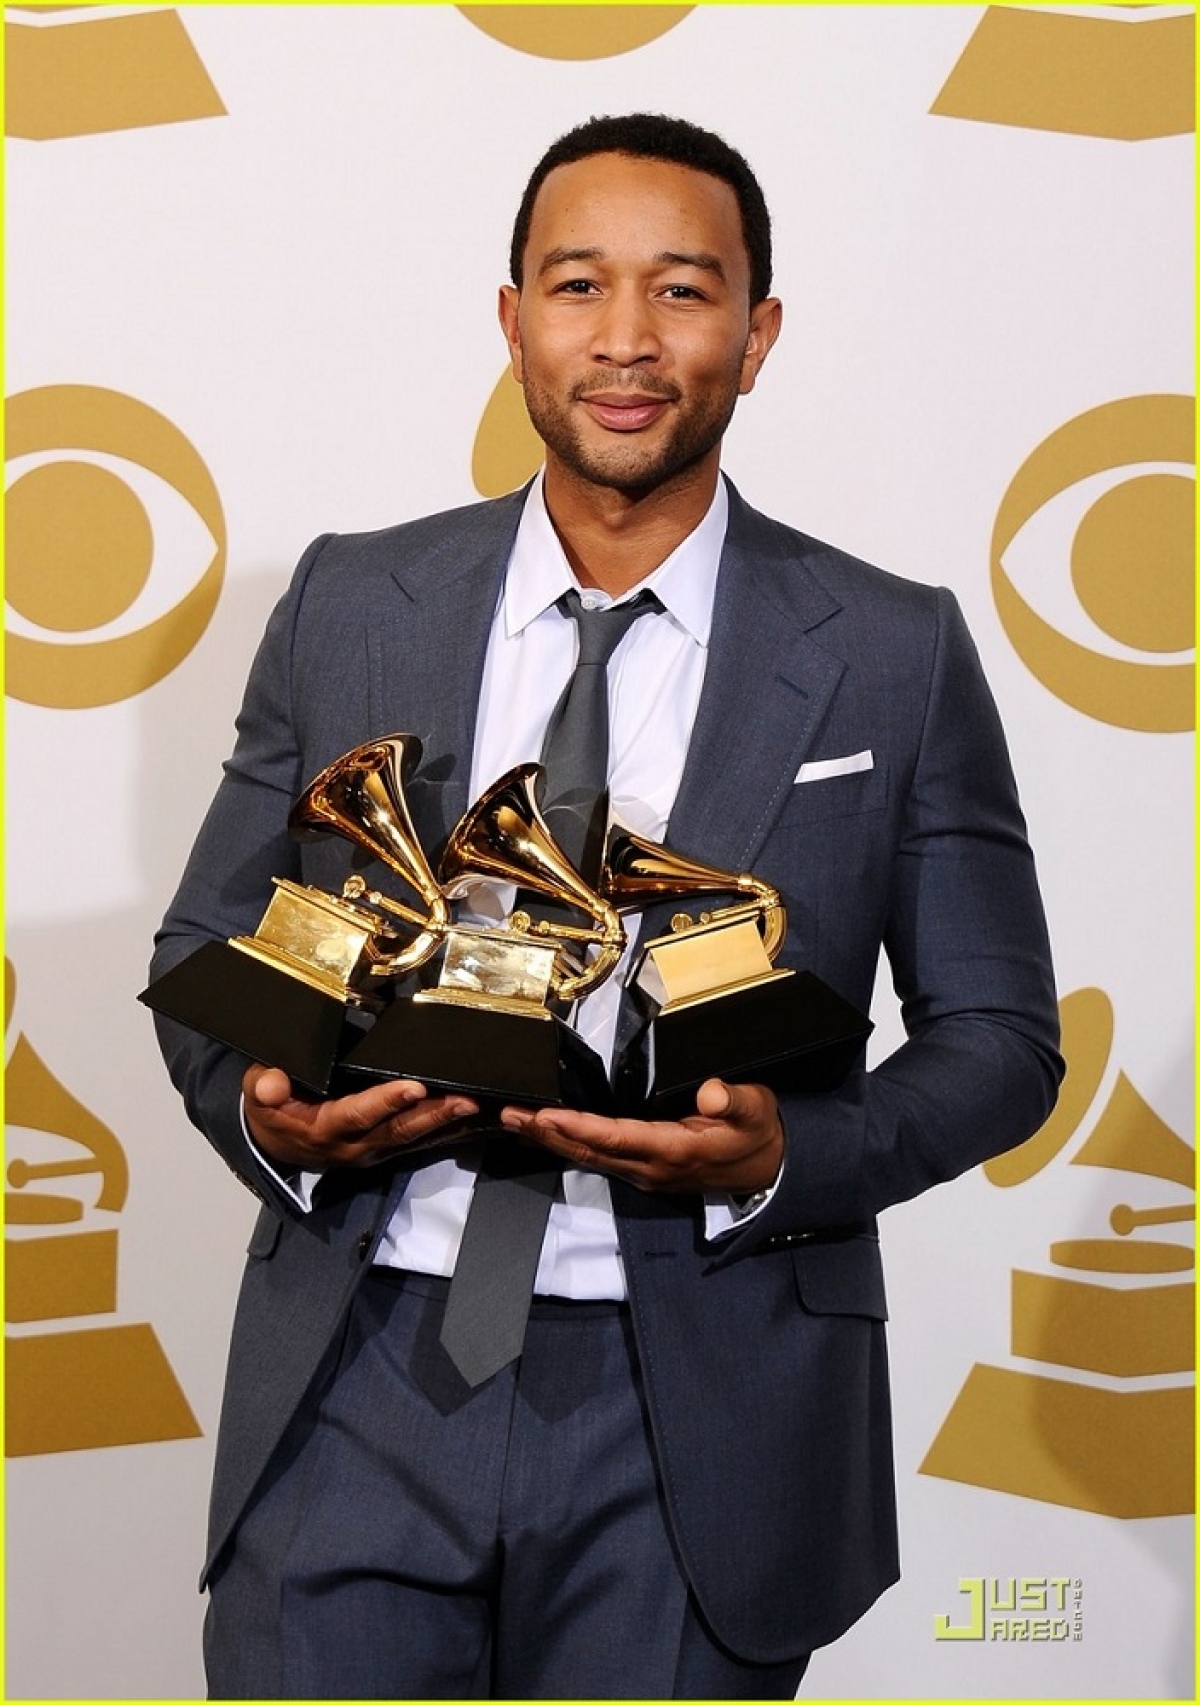 american music legend john legend to perform at vinfuture awards picture 1